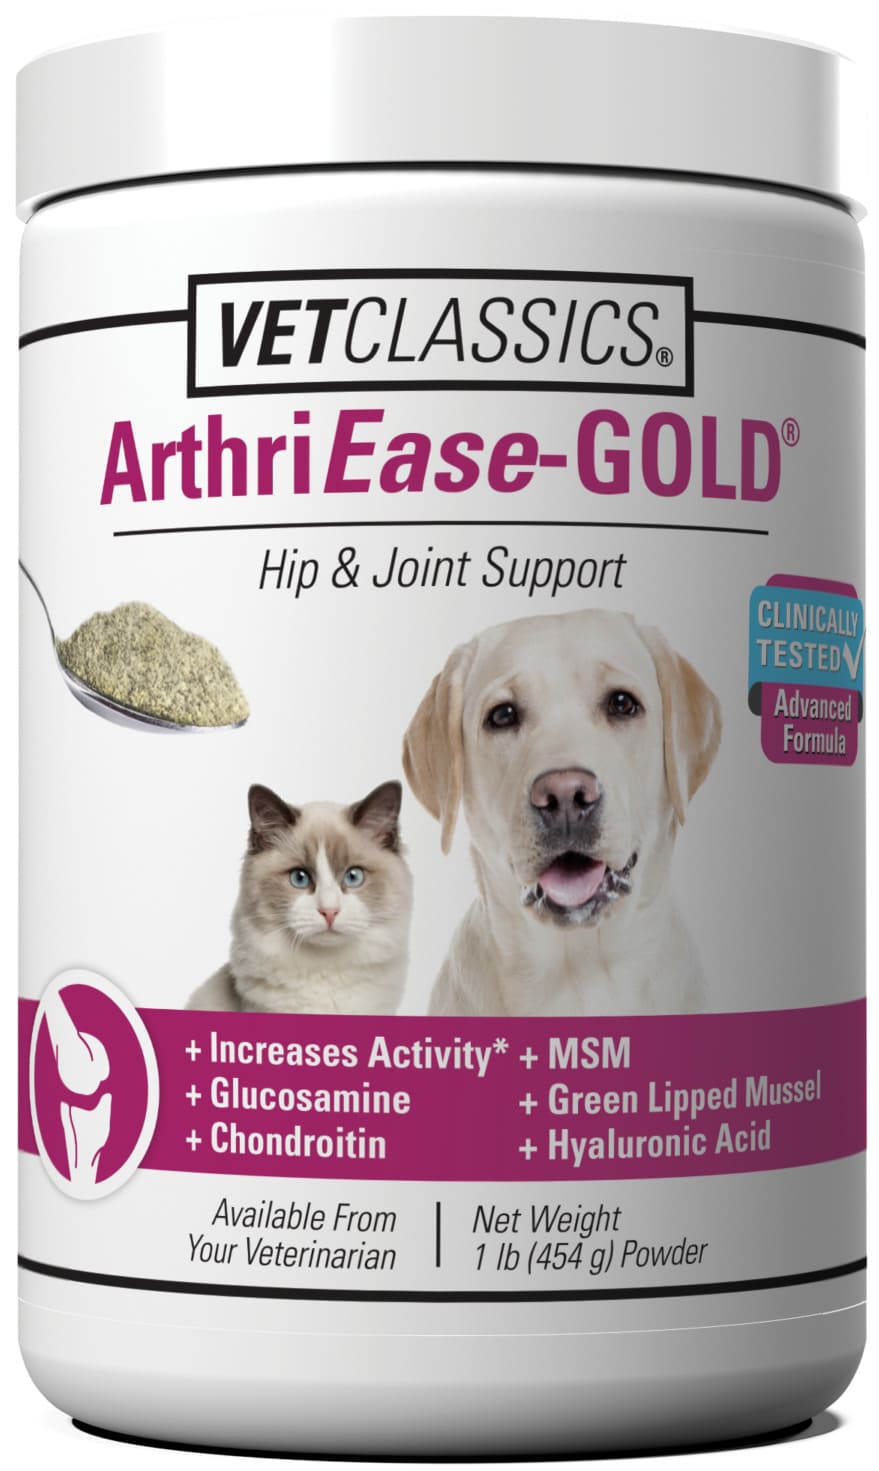 VetClassics ArthriEase-GOLD Powder for Cats & Dogs 1 lbs 1